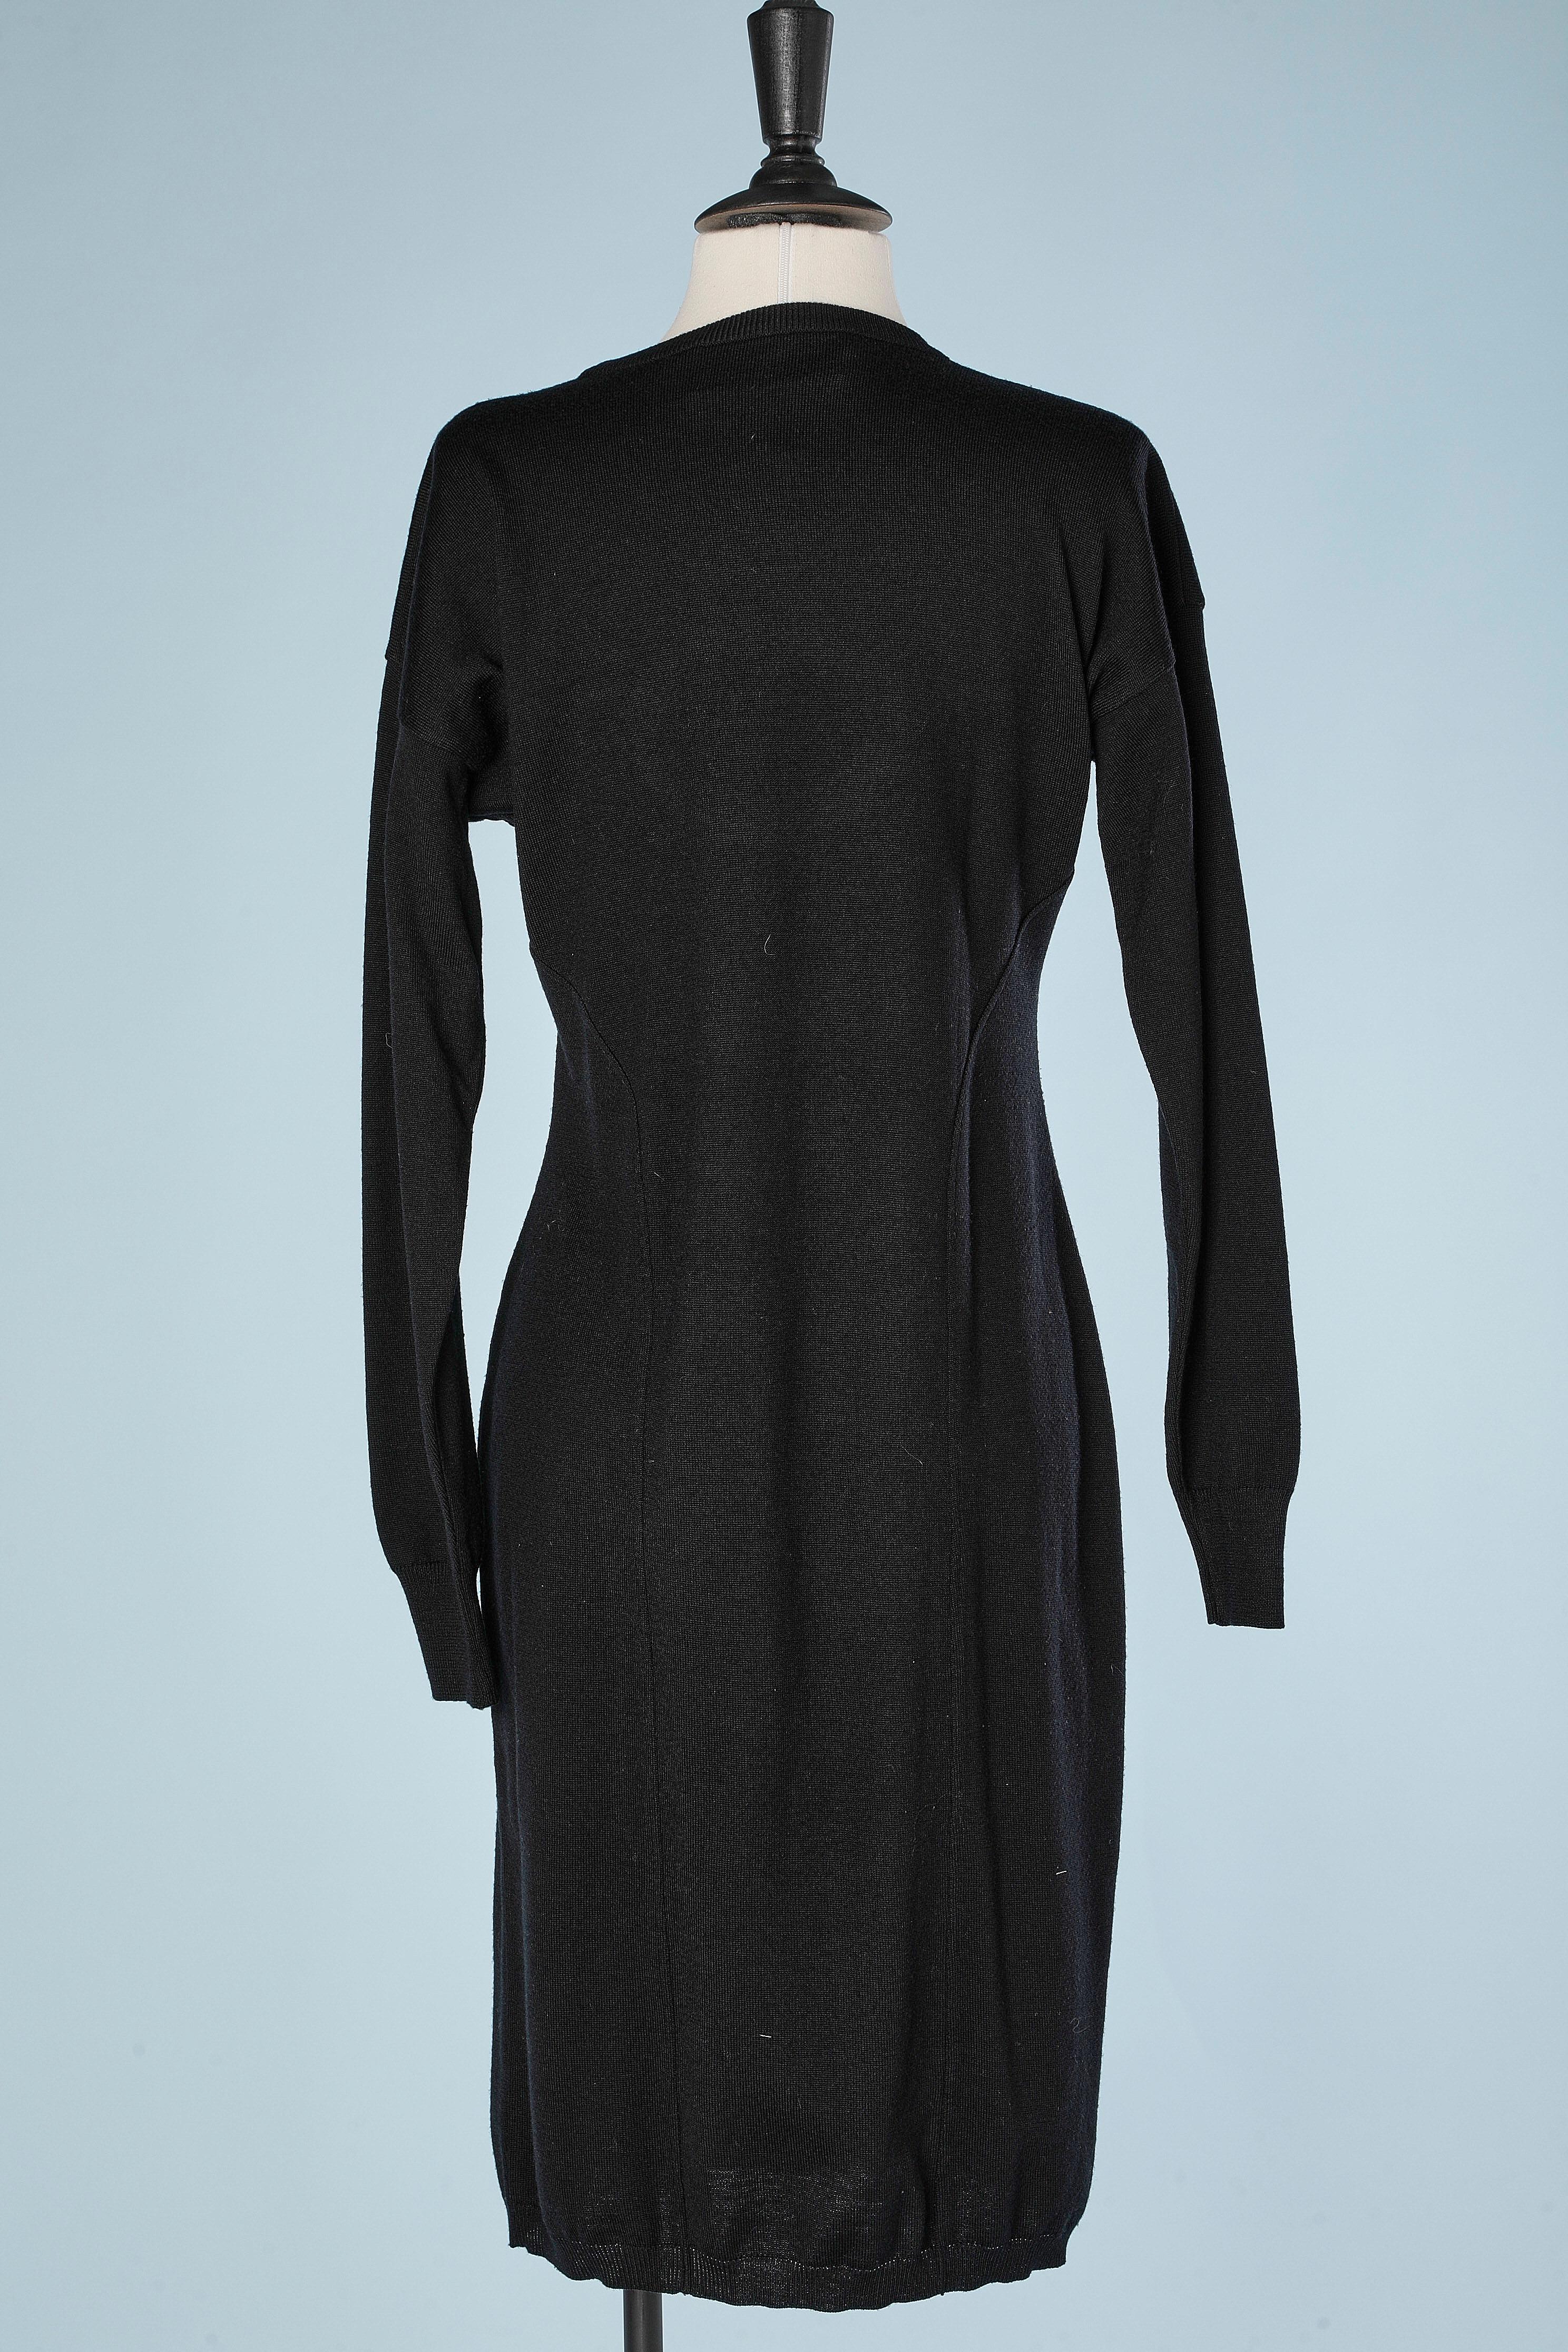 Black knit dress with red passementerie application Giani Versace  For Sale 1